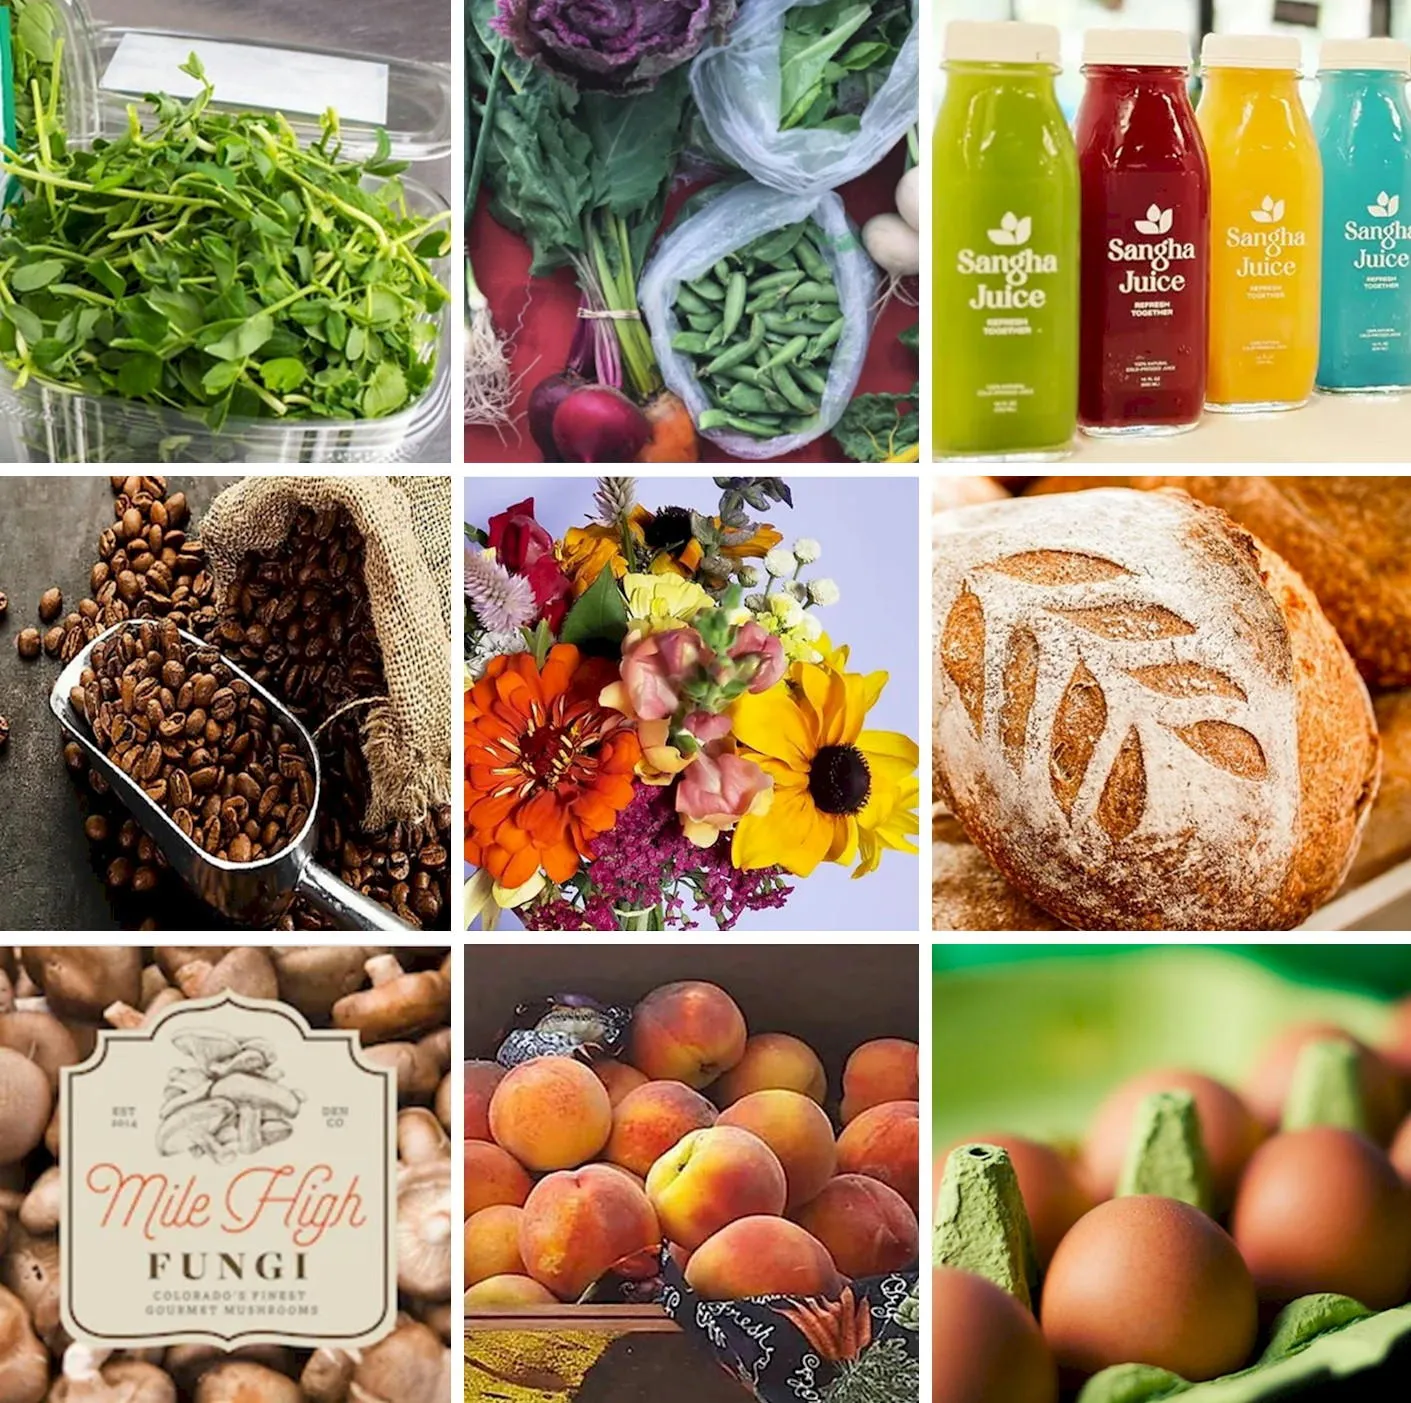 9 images showing fruits, flowers, vegetables, coffee, mushrooms, juice, eggs, and bread